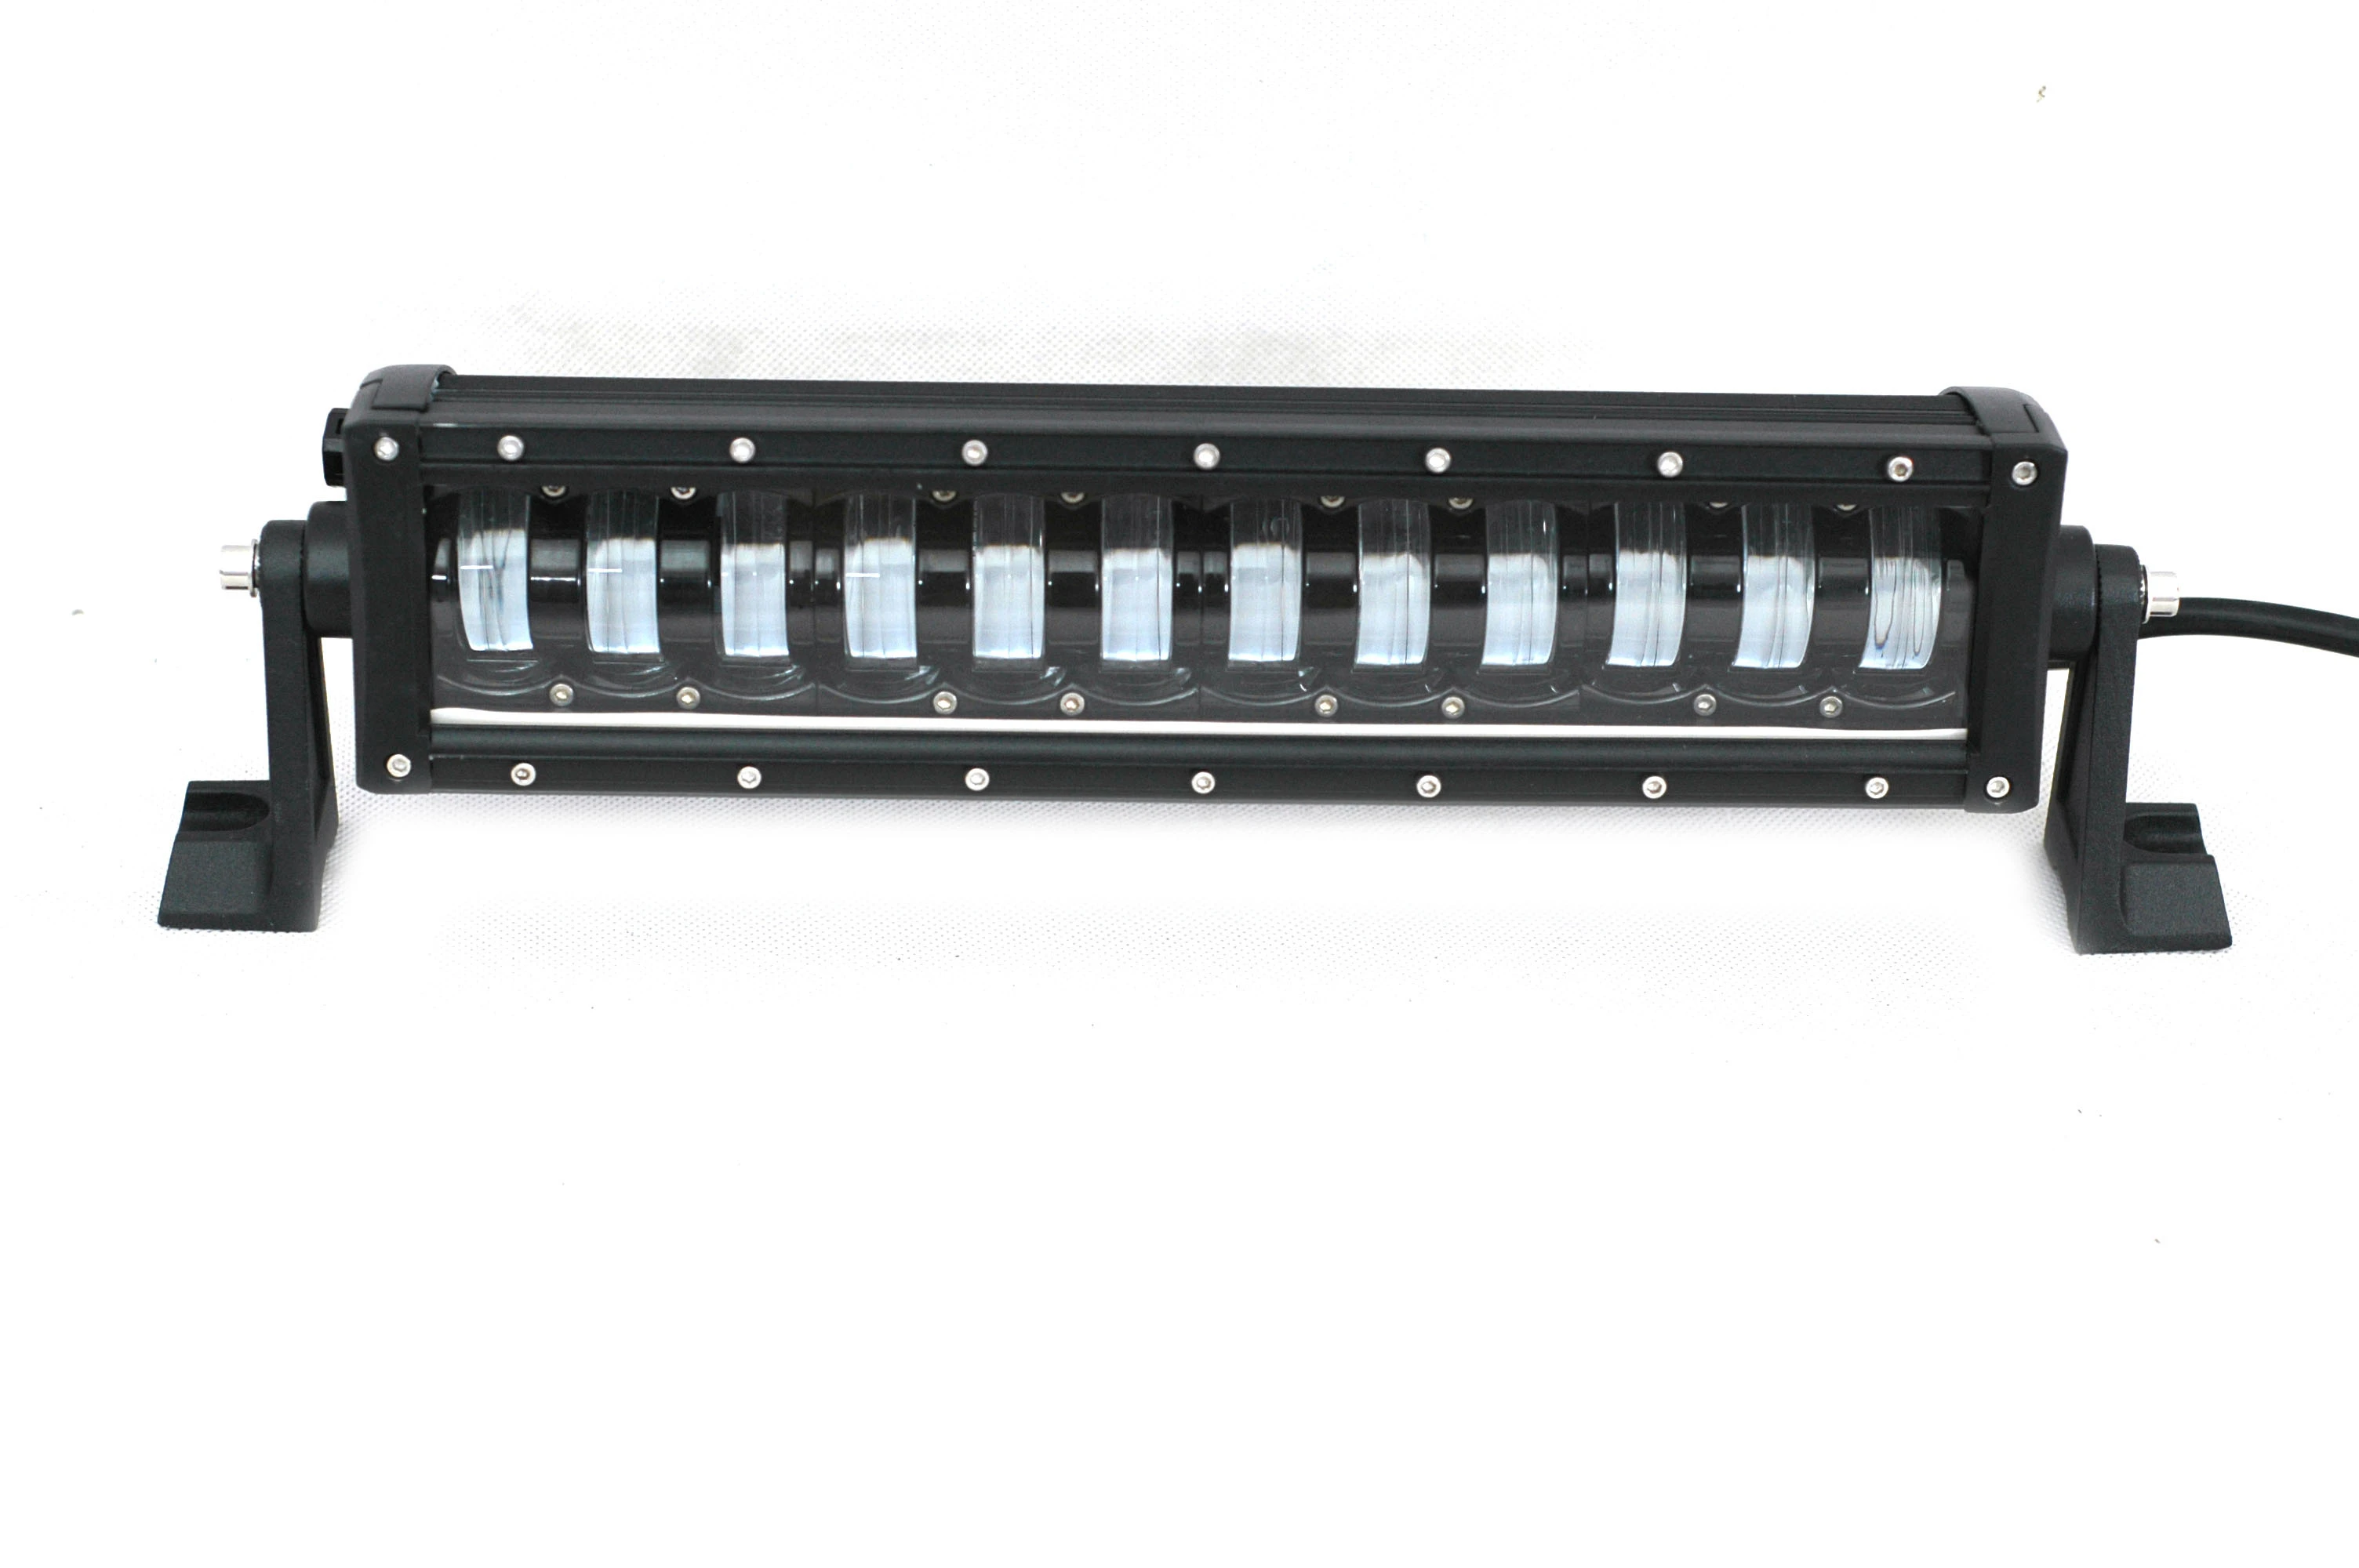 Auto lighting system 17 Inch 96w led light bars with high low beam vehicles accessories -jeep led lights offroad accessories